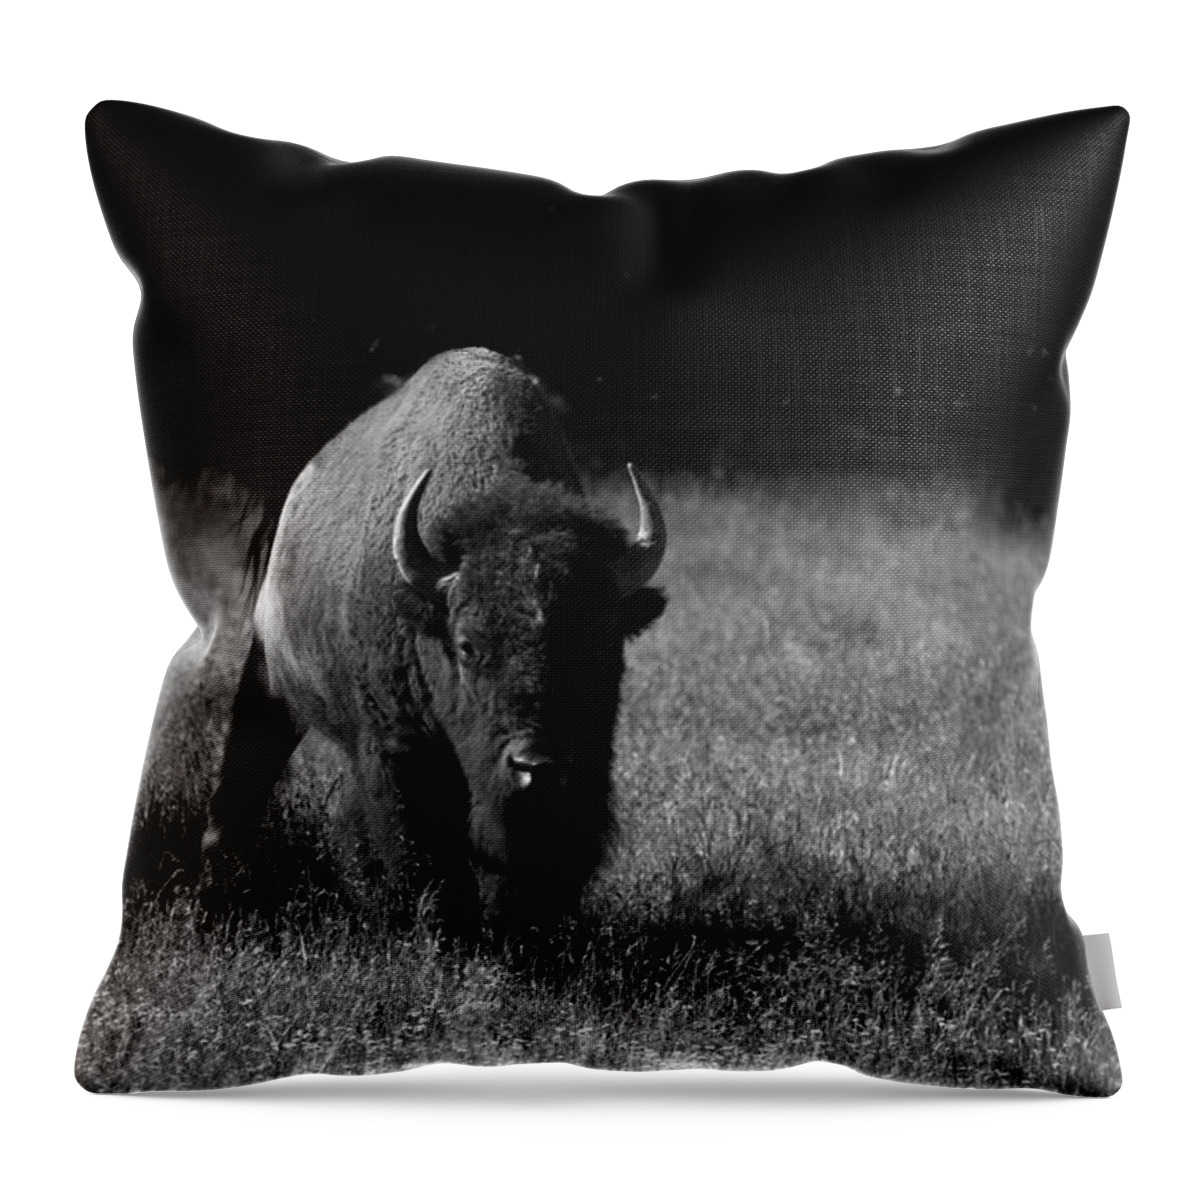 Mammal Throw Pillow featuring the photograph Bison by Ralf Kaiser